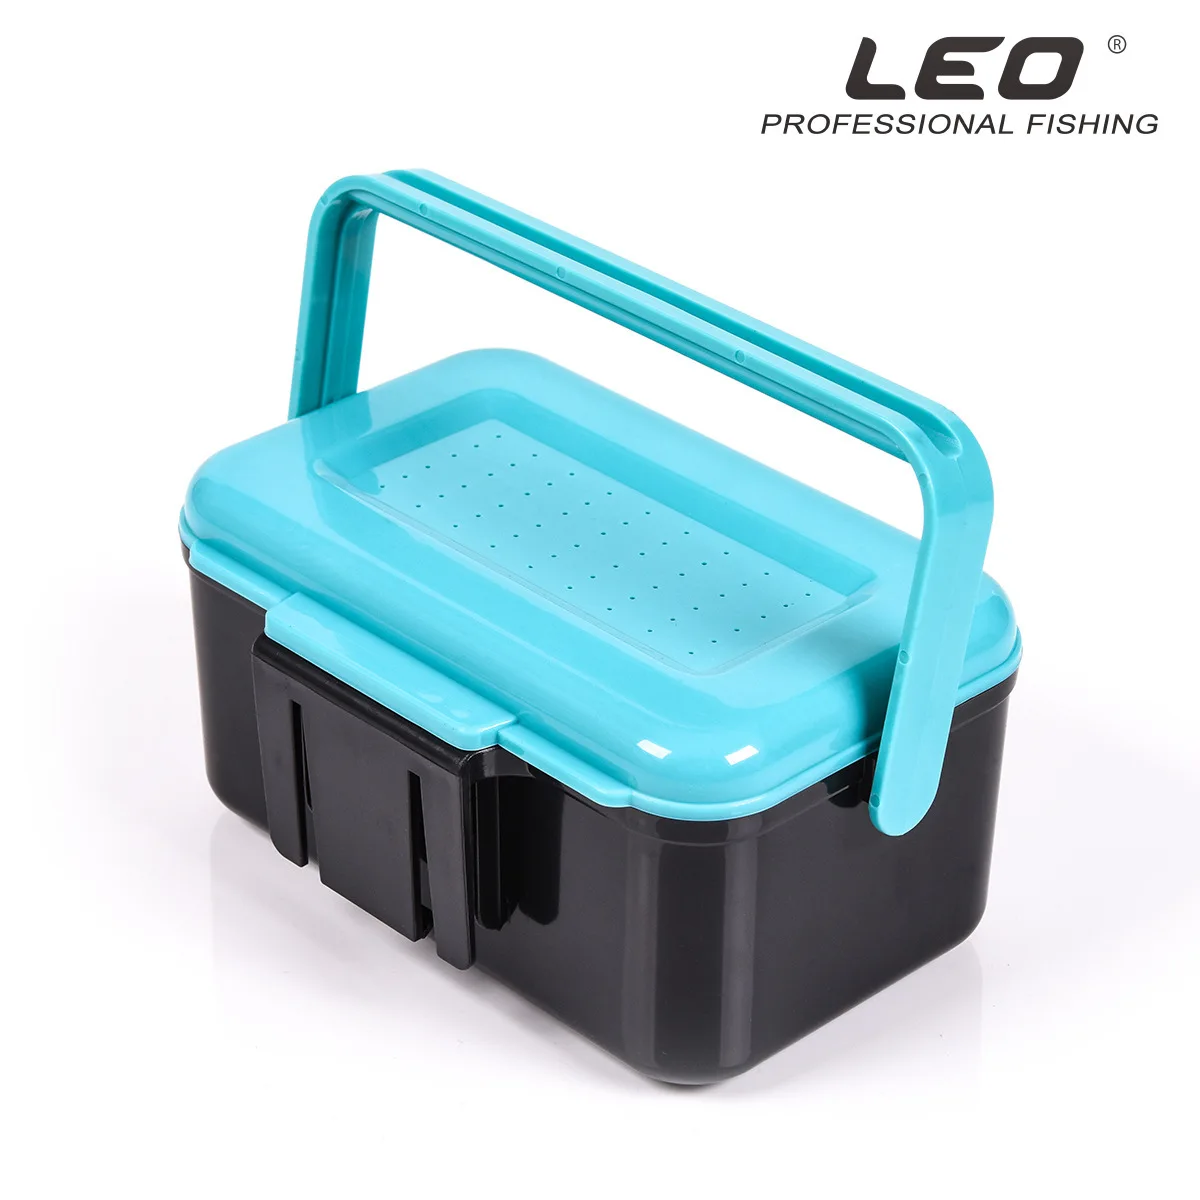 LEO ABS Plastic Fishing Box Tool 27778 Live Baits Case Earthworm Bait Worm Lure Tackle Storage Container Lures Hook | Спорт и